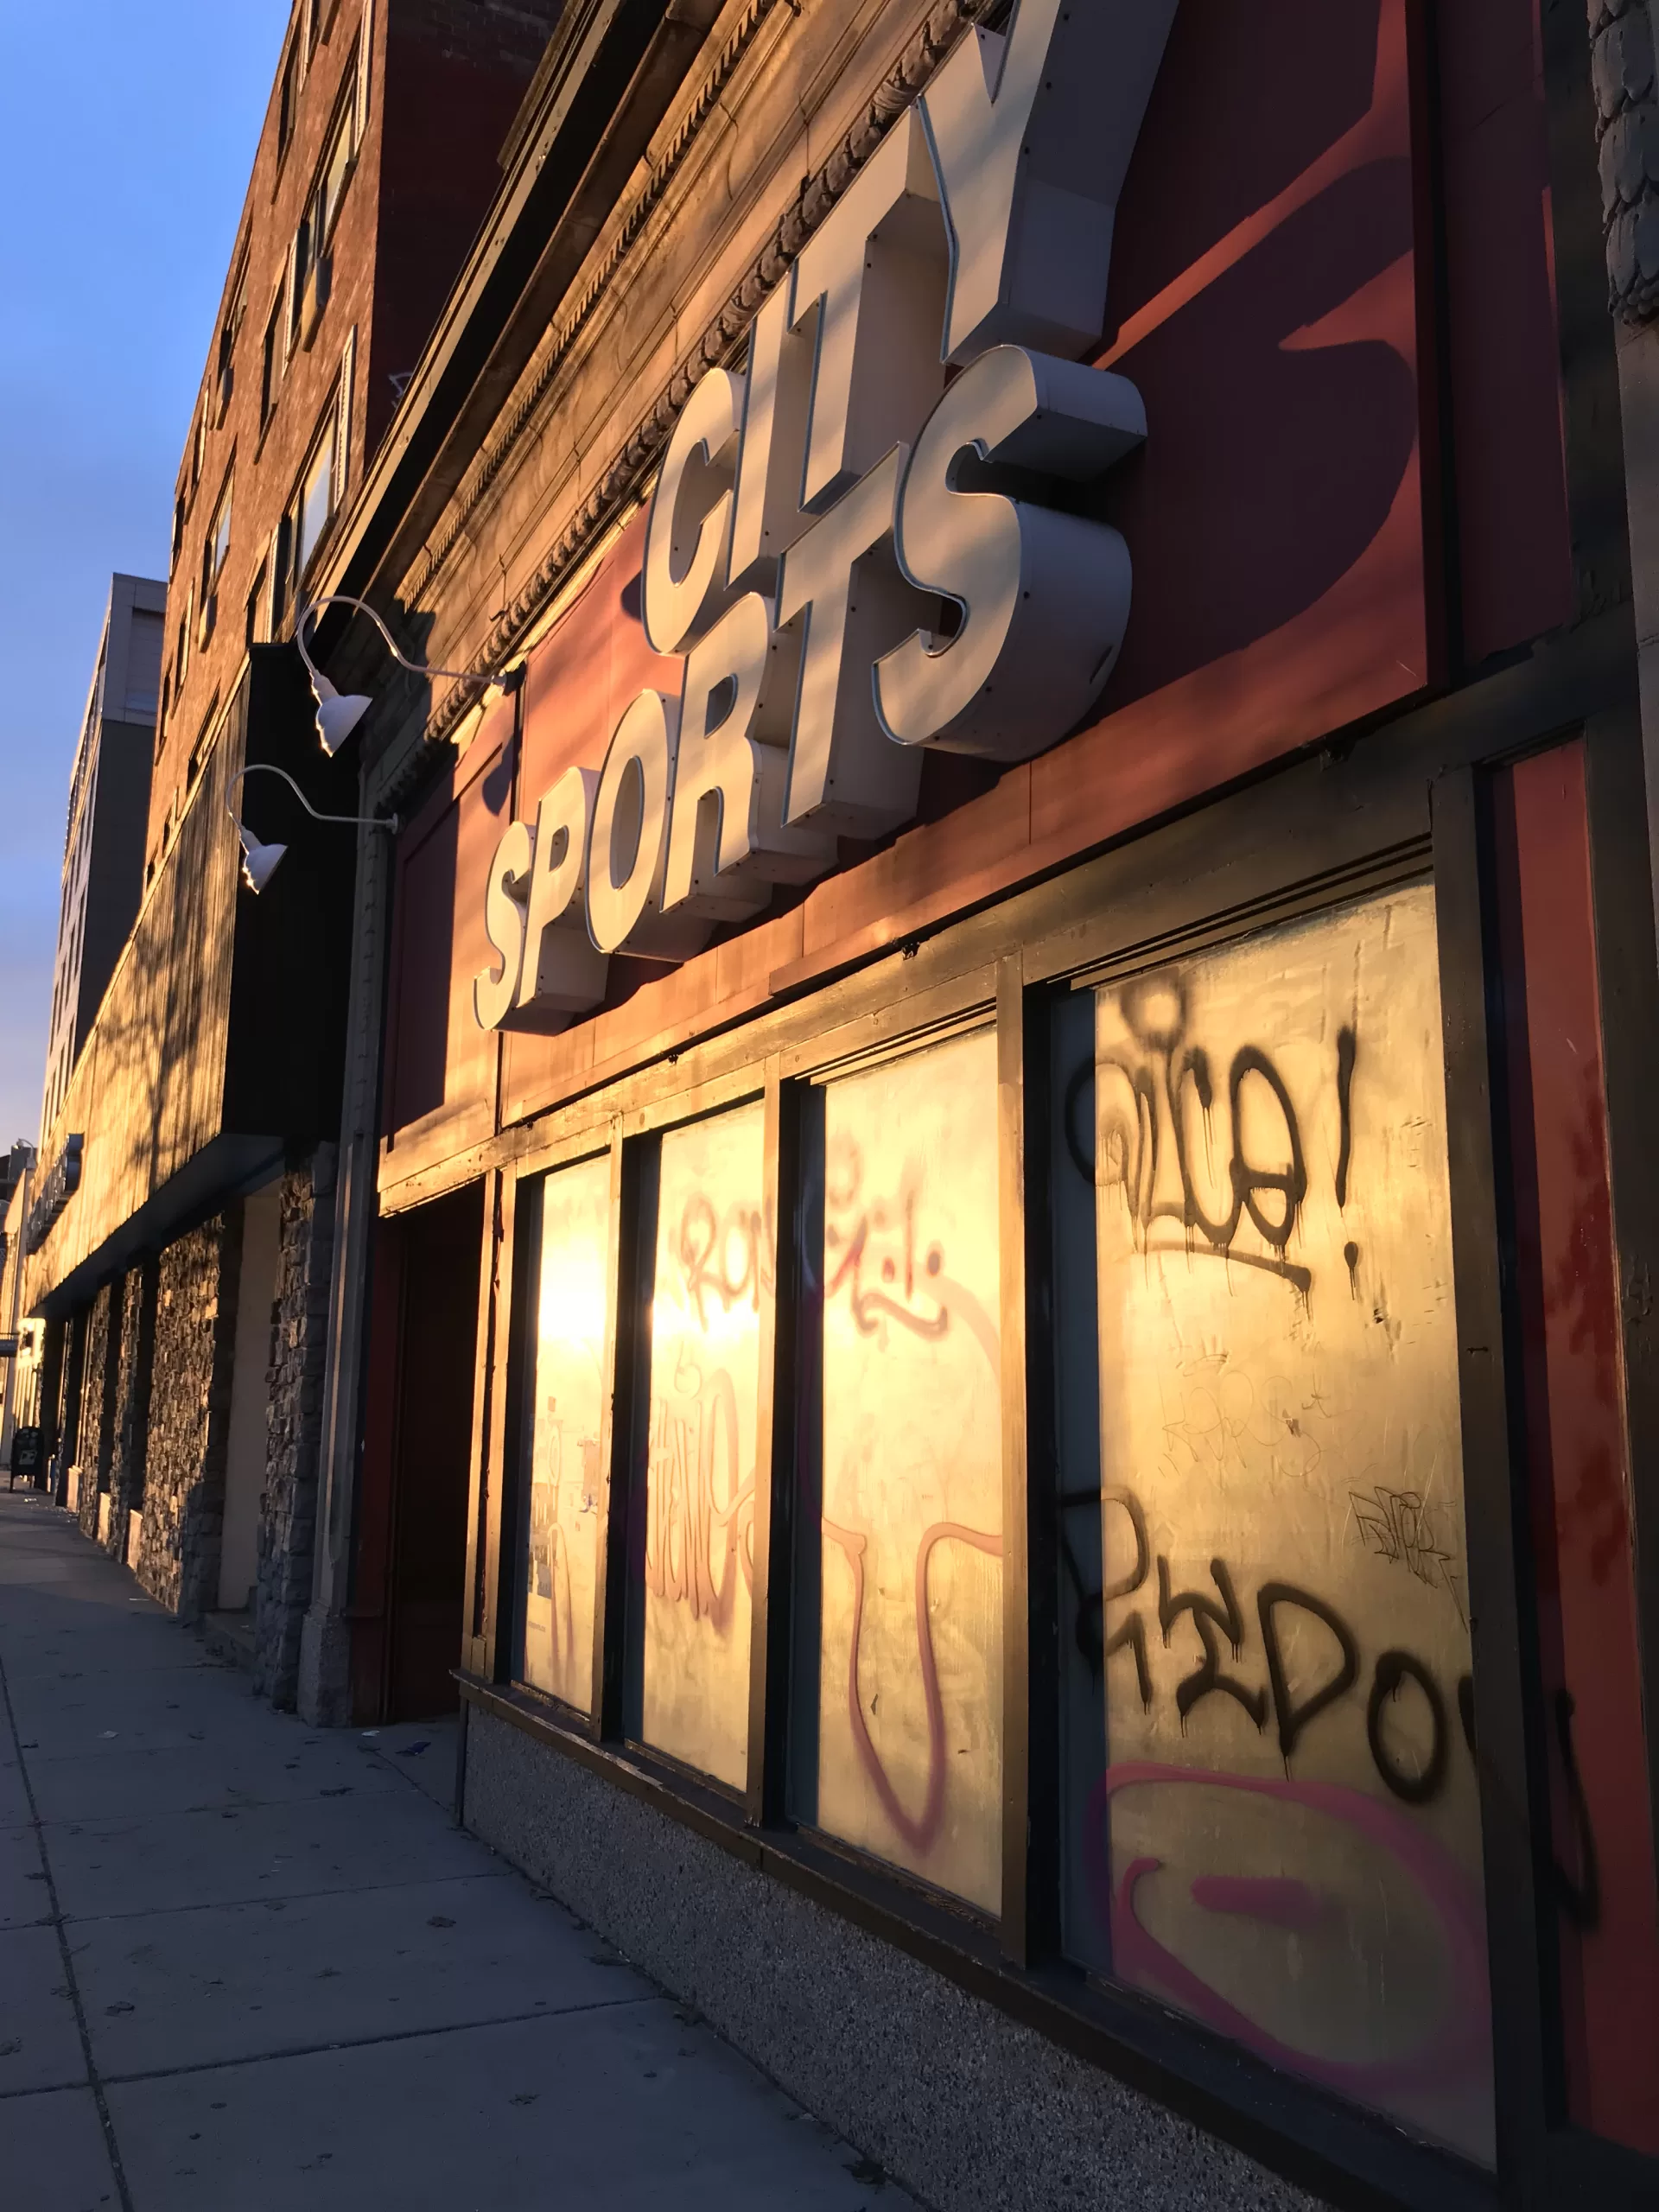 An abandoned City Sports store front on Commonwealth Avenue in North Brookline, MA. The windows are covered on the inside and there's graffiti on the outside. The sun is setting and shining warm light on the building.